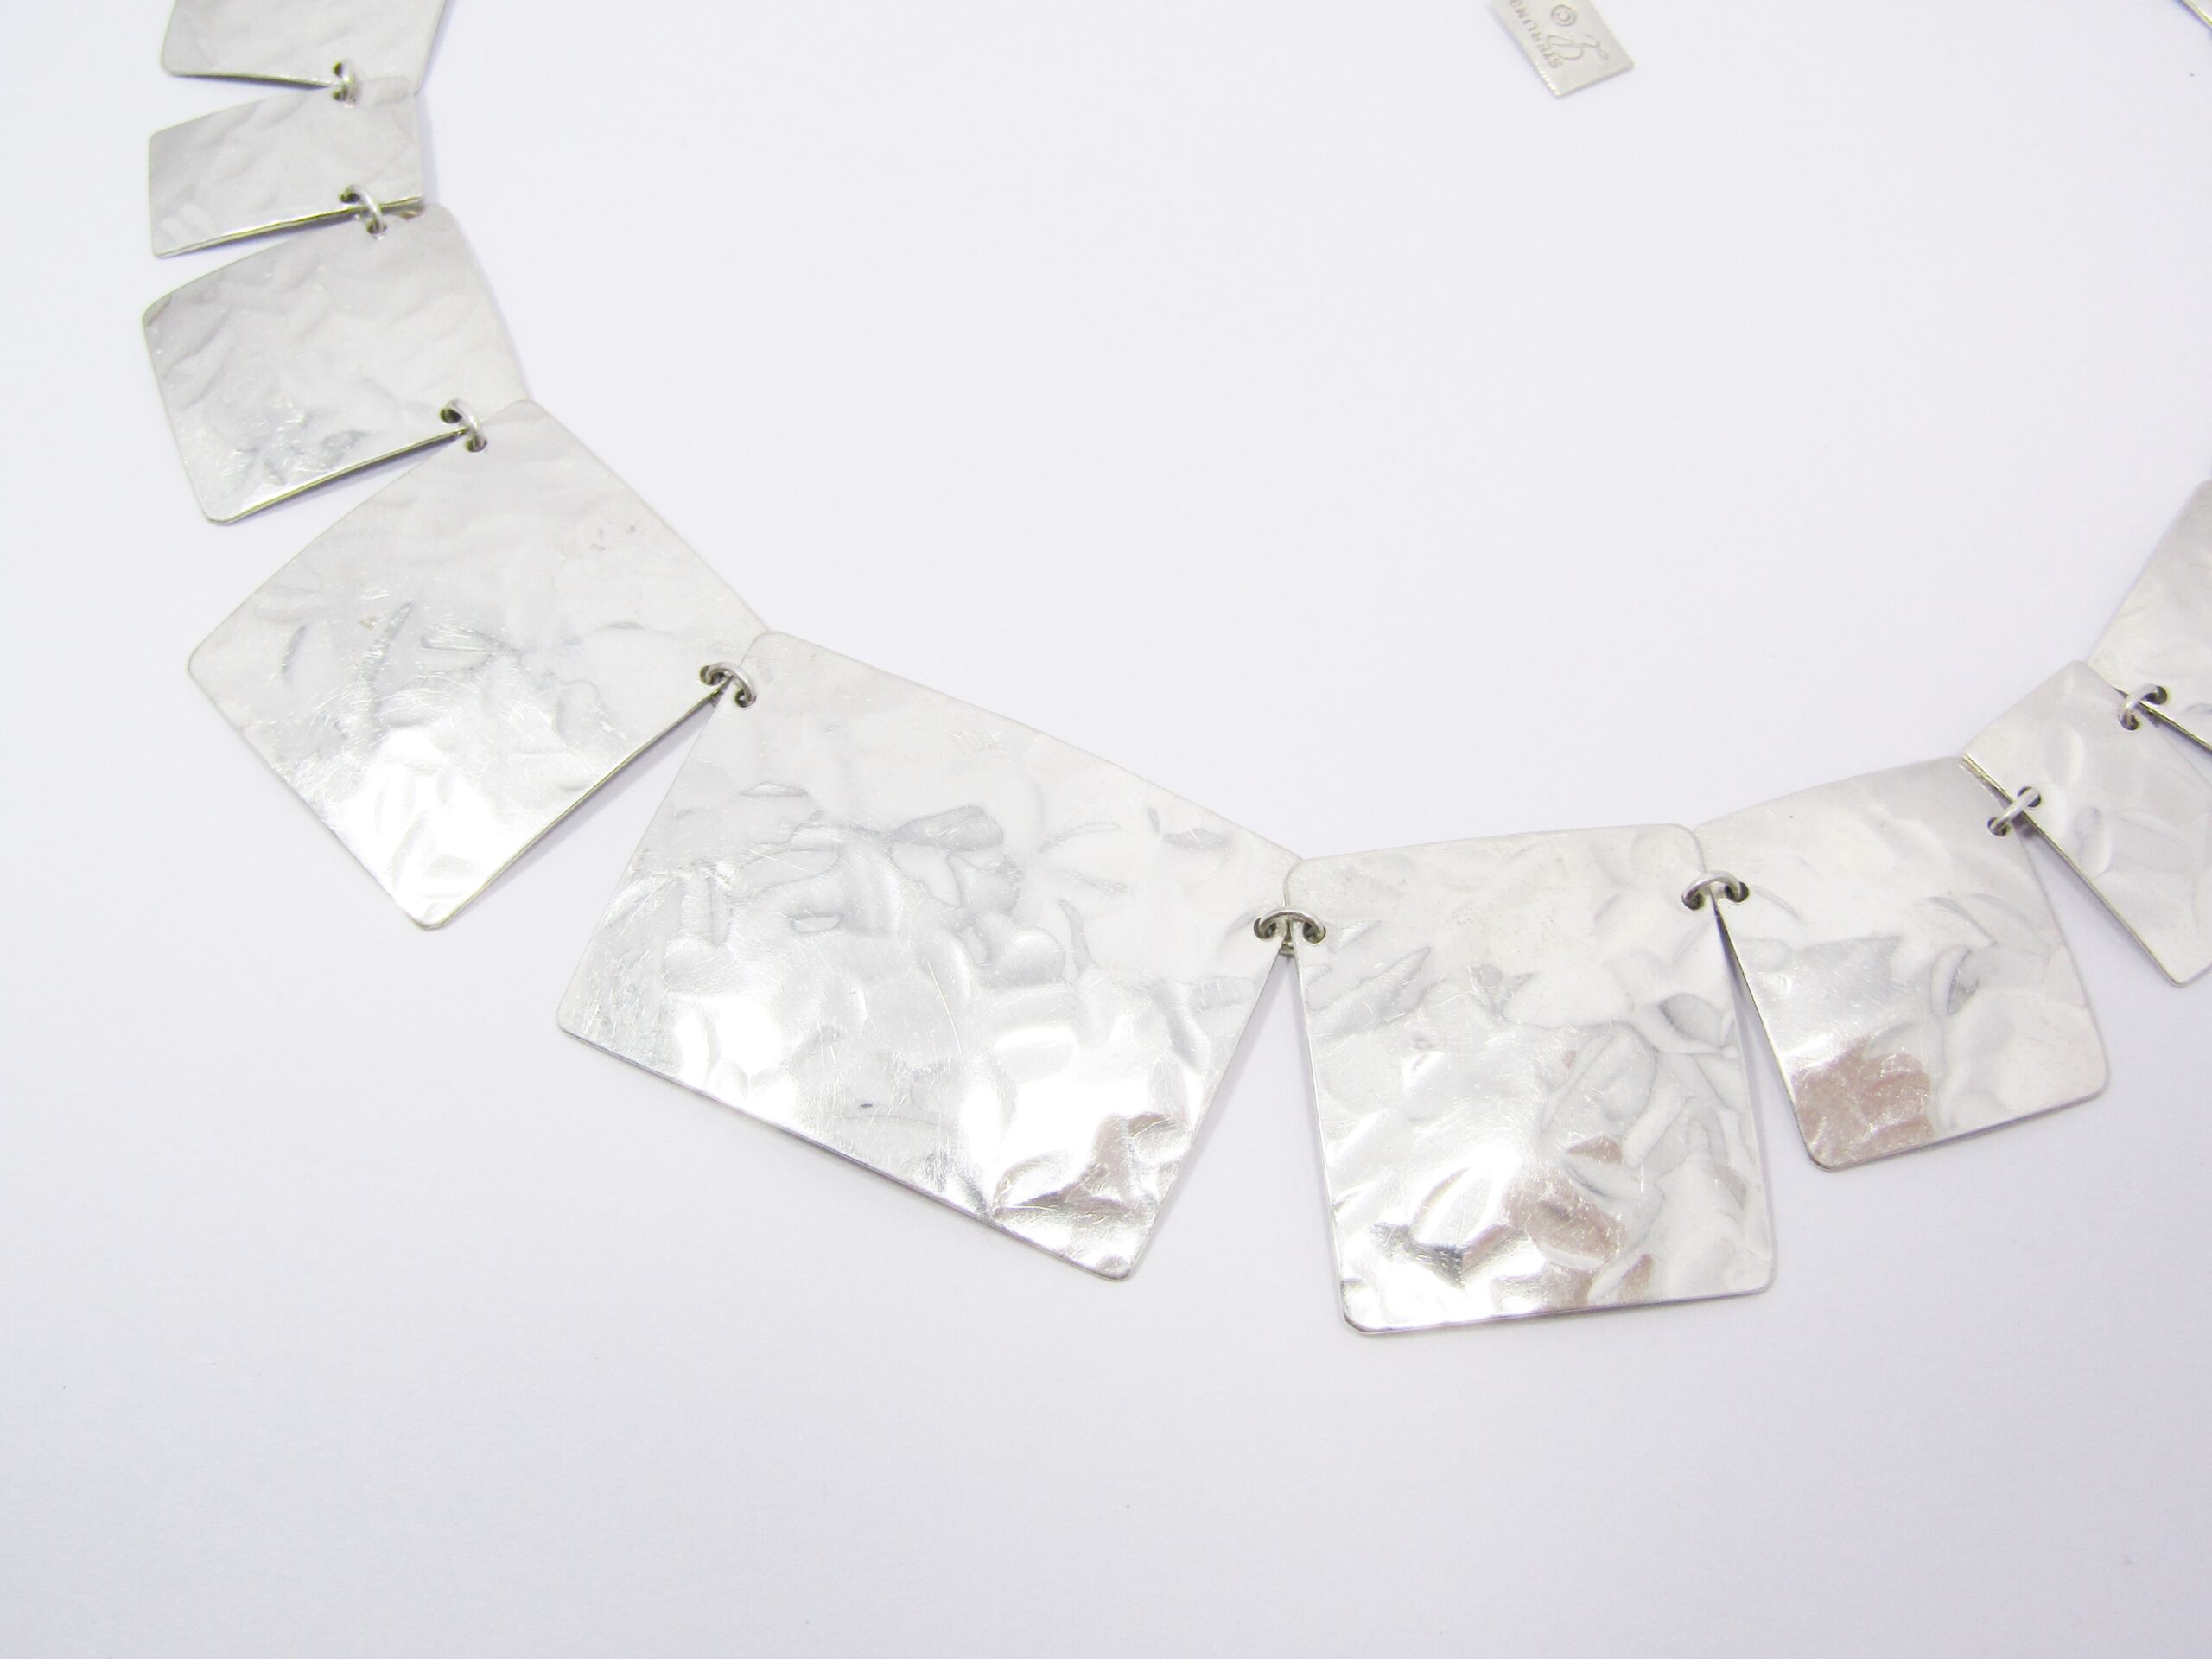 A Gorgeous Handmade Hammered Designed Necklace in Sterling Silver.